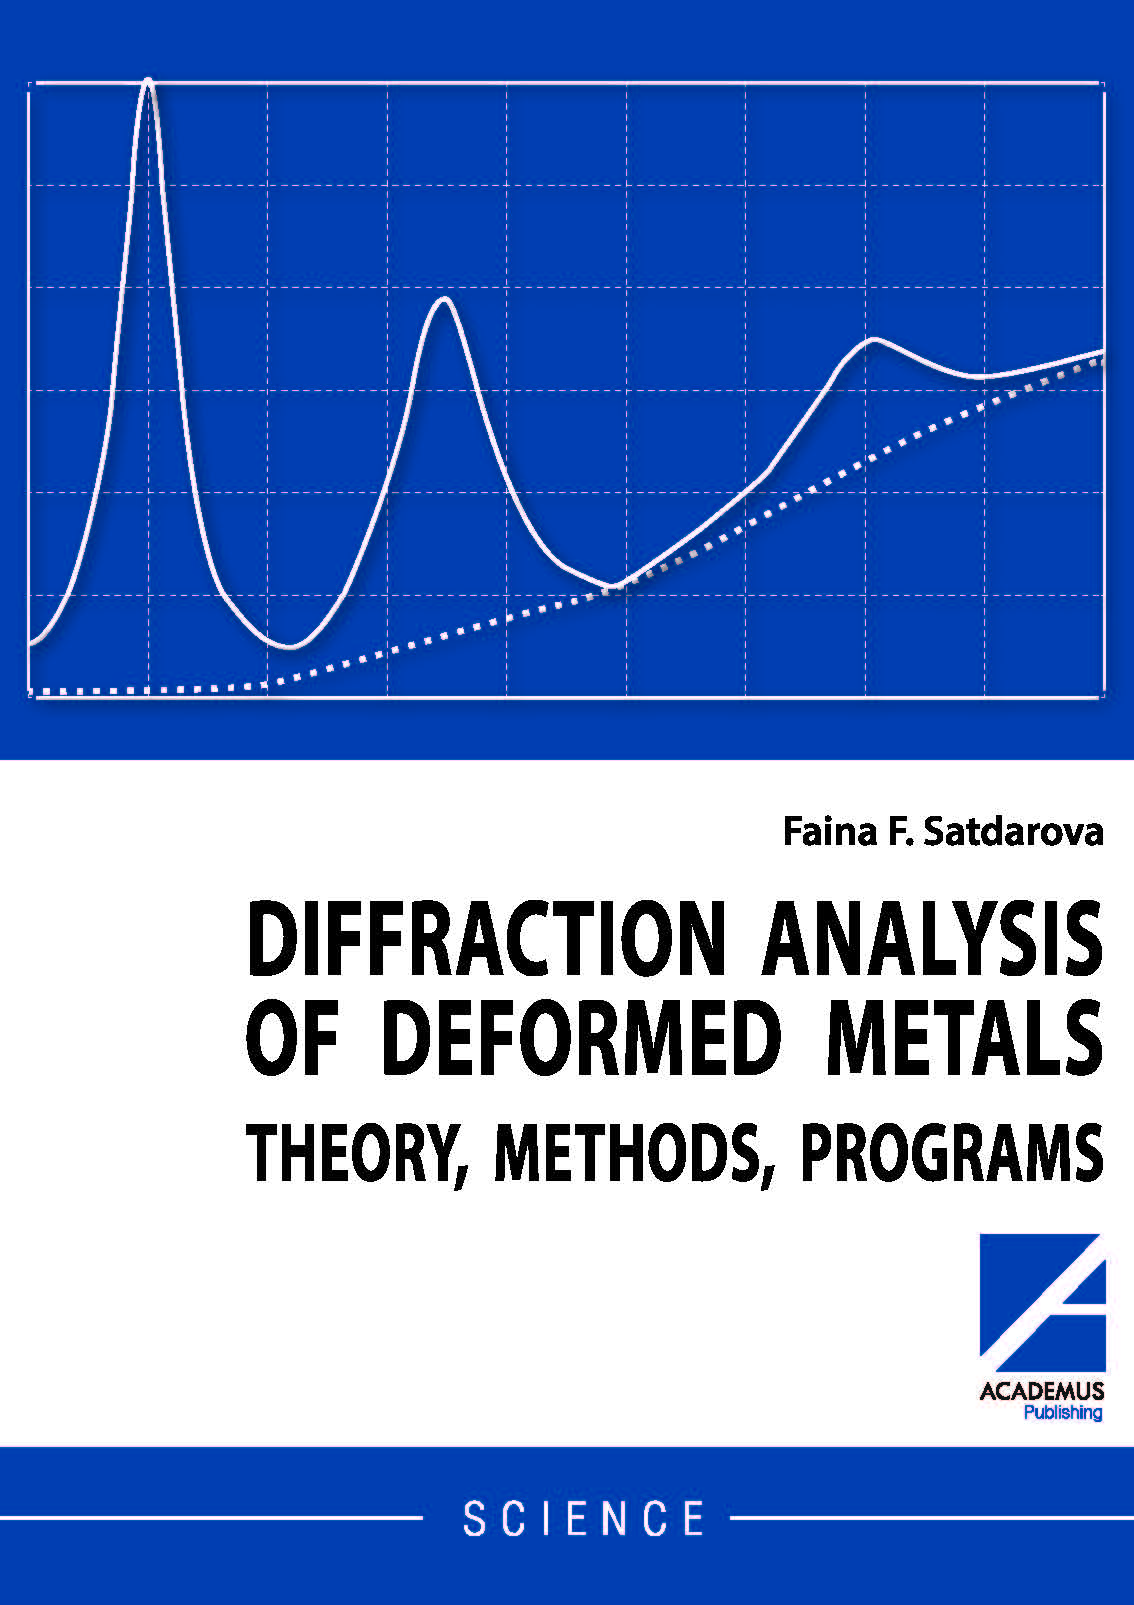                         DIFFRACTION ANALYSIS OF DEFORMED METALS: Theory, Methods, Programs
            